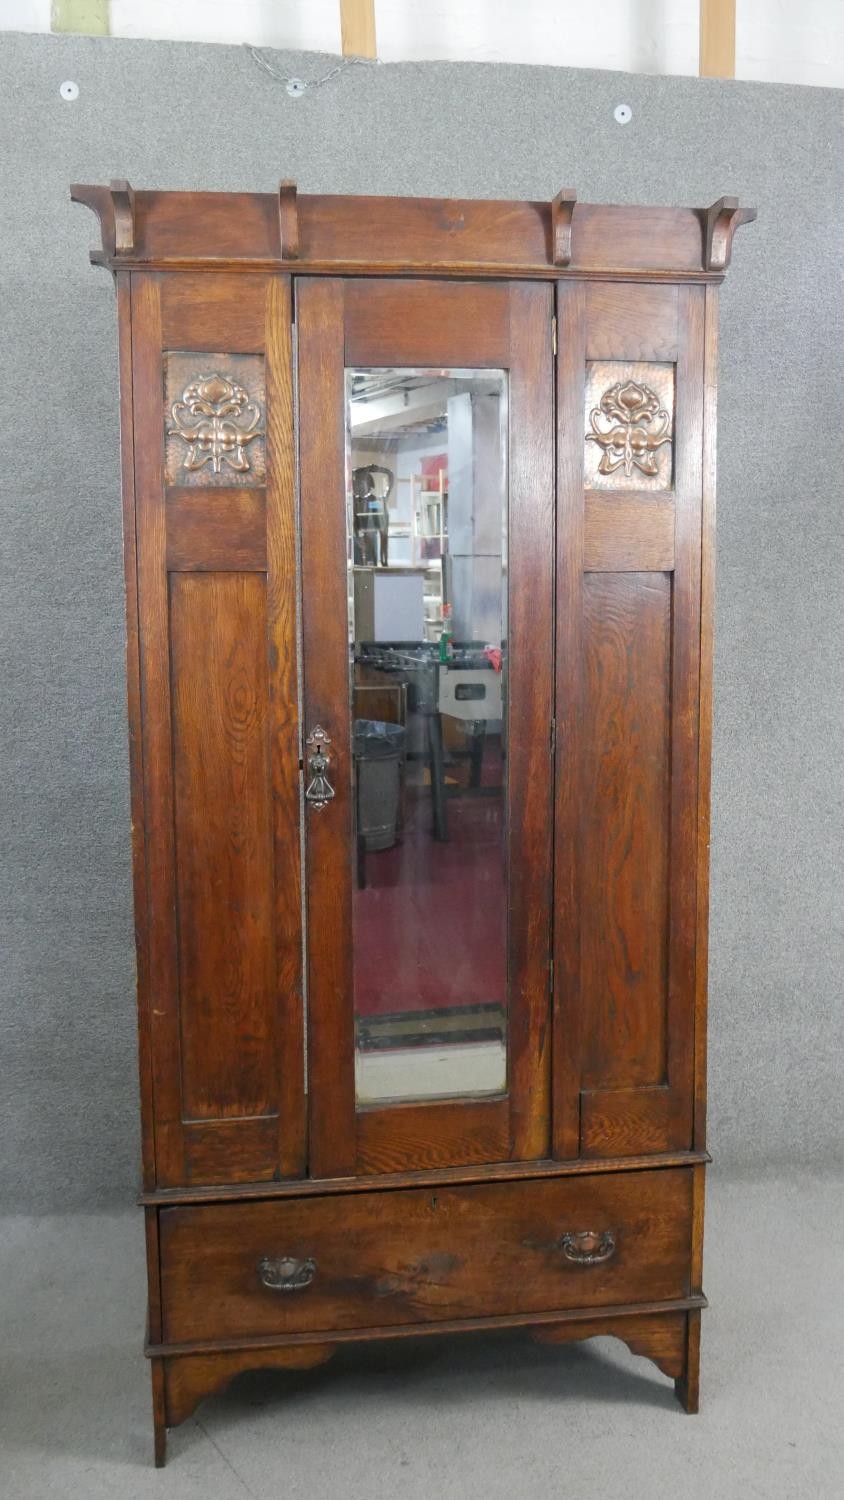 A late 19th century oak Arts and Crafts wardrobe with inset embossed copper panels. H.190 W.89 D.